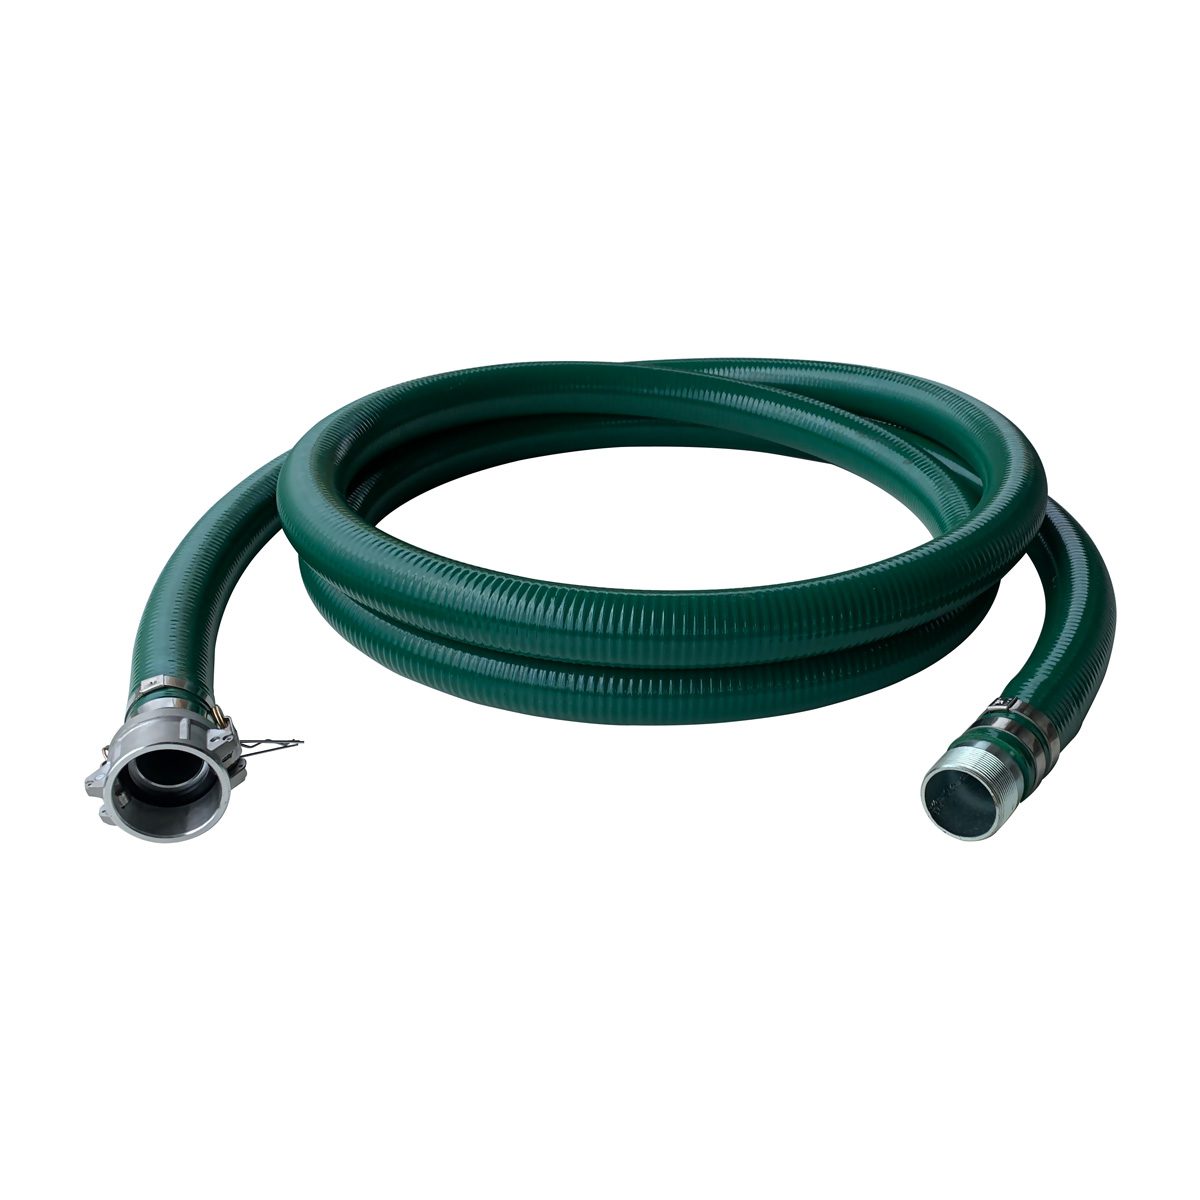 2.30 O.D GREEN 85 PSI RATED  100 FT ROLL  <GRCL200ROLL SUCTION HOSE 2" I.D 